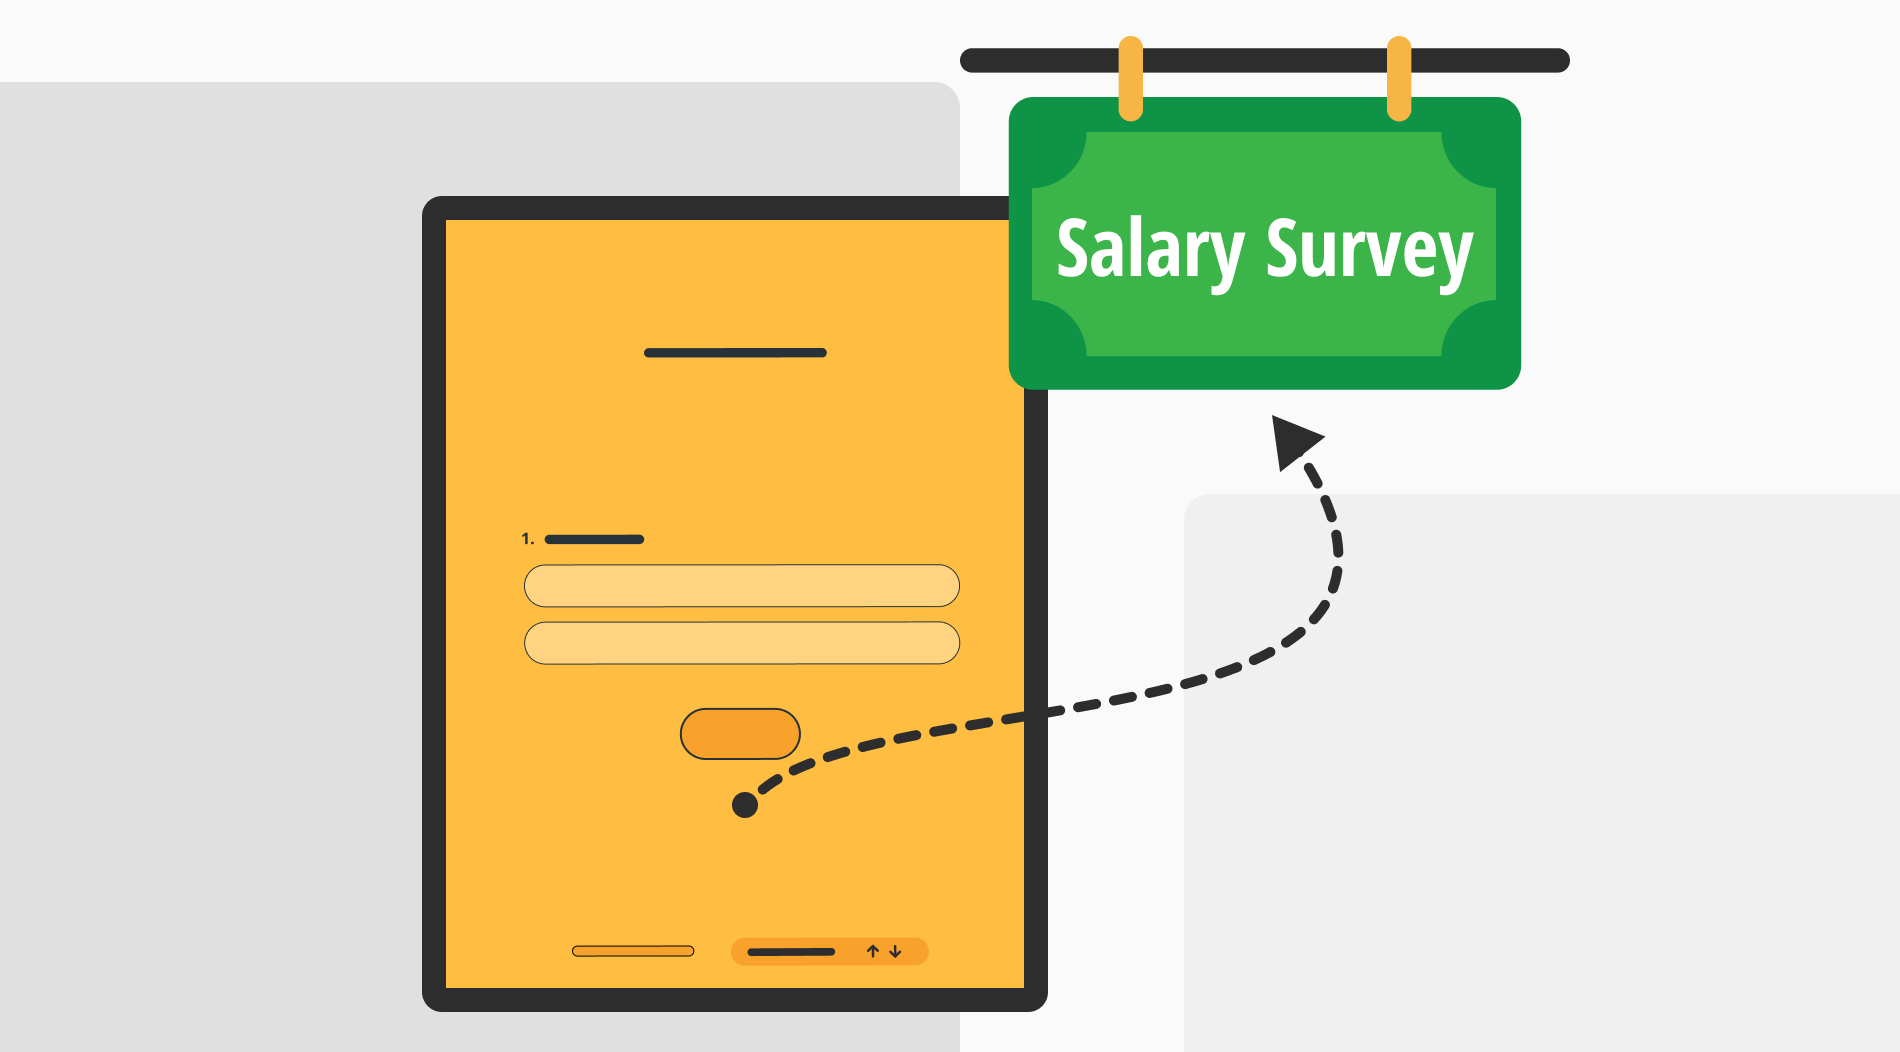 Salary survey: Definition, tips & question examples